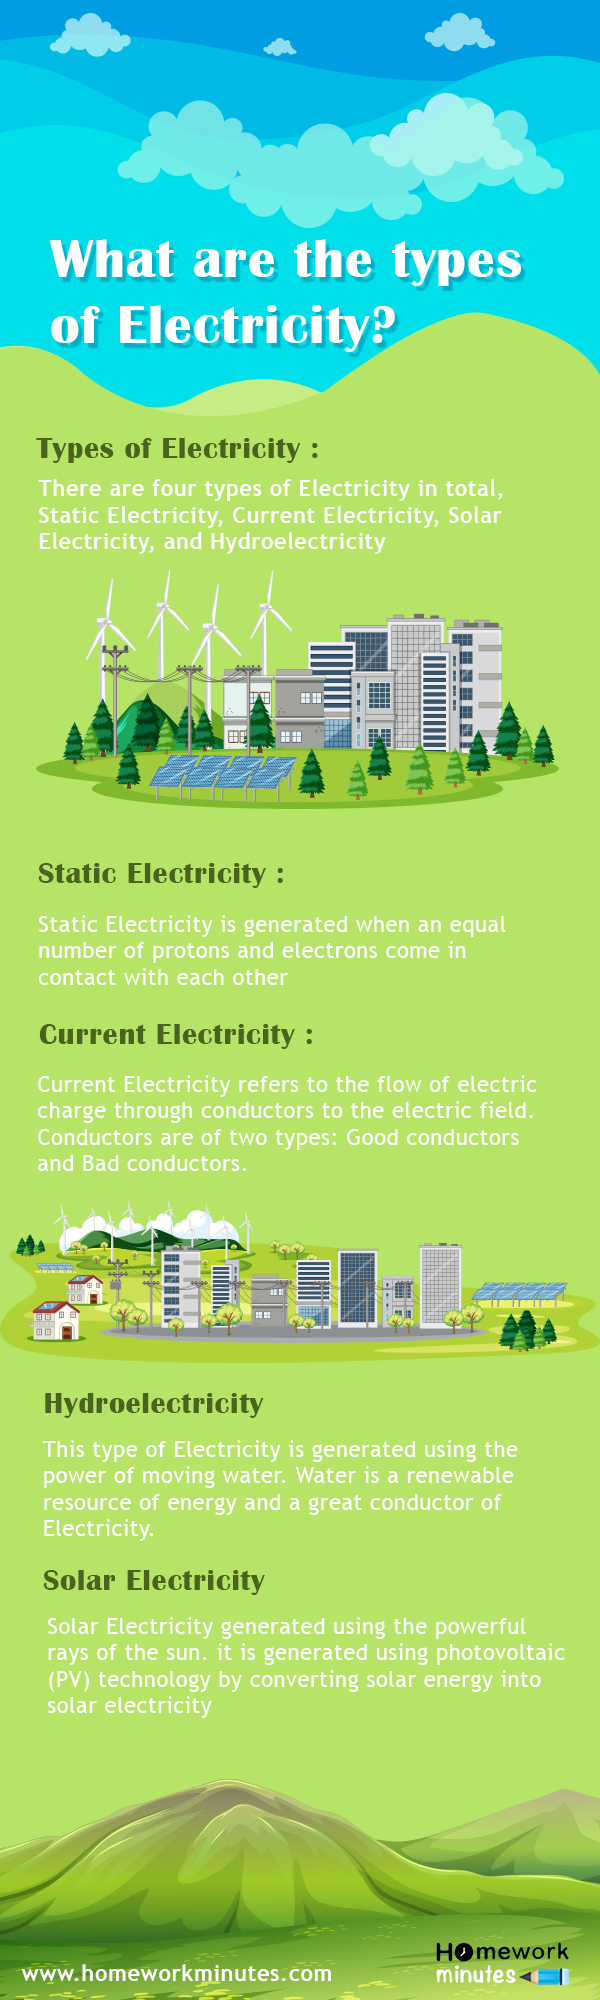 What are the types of Electricity